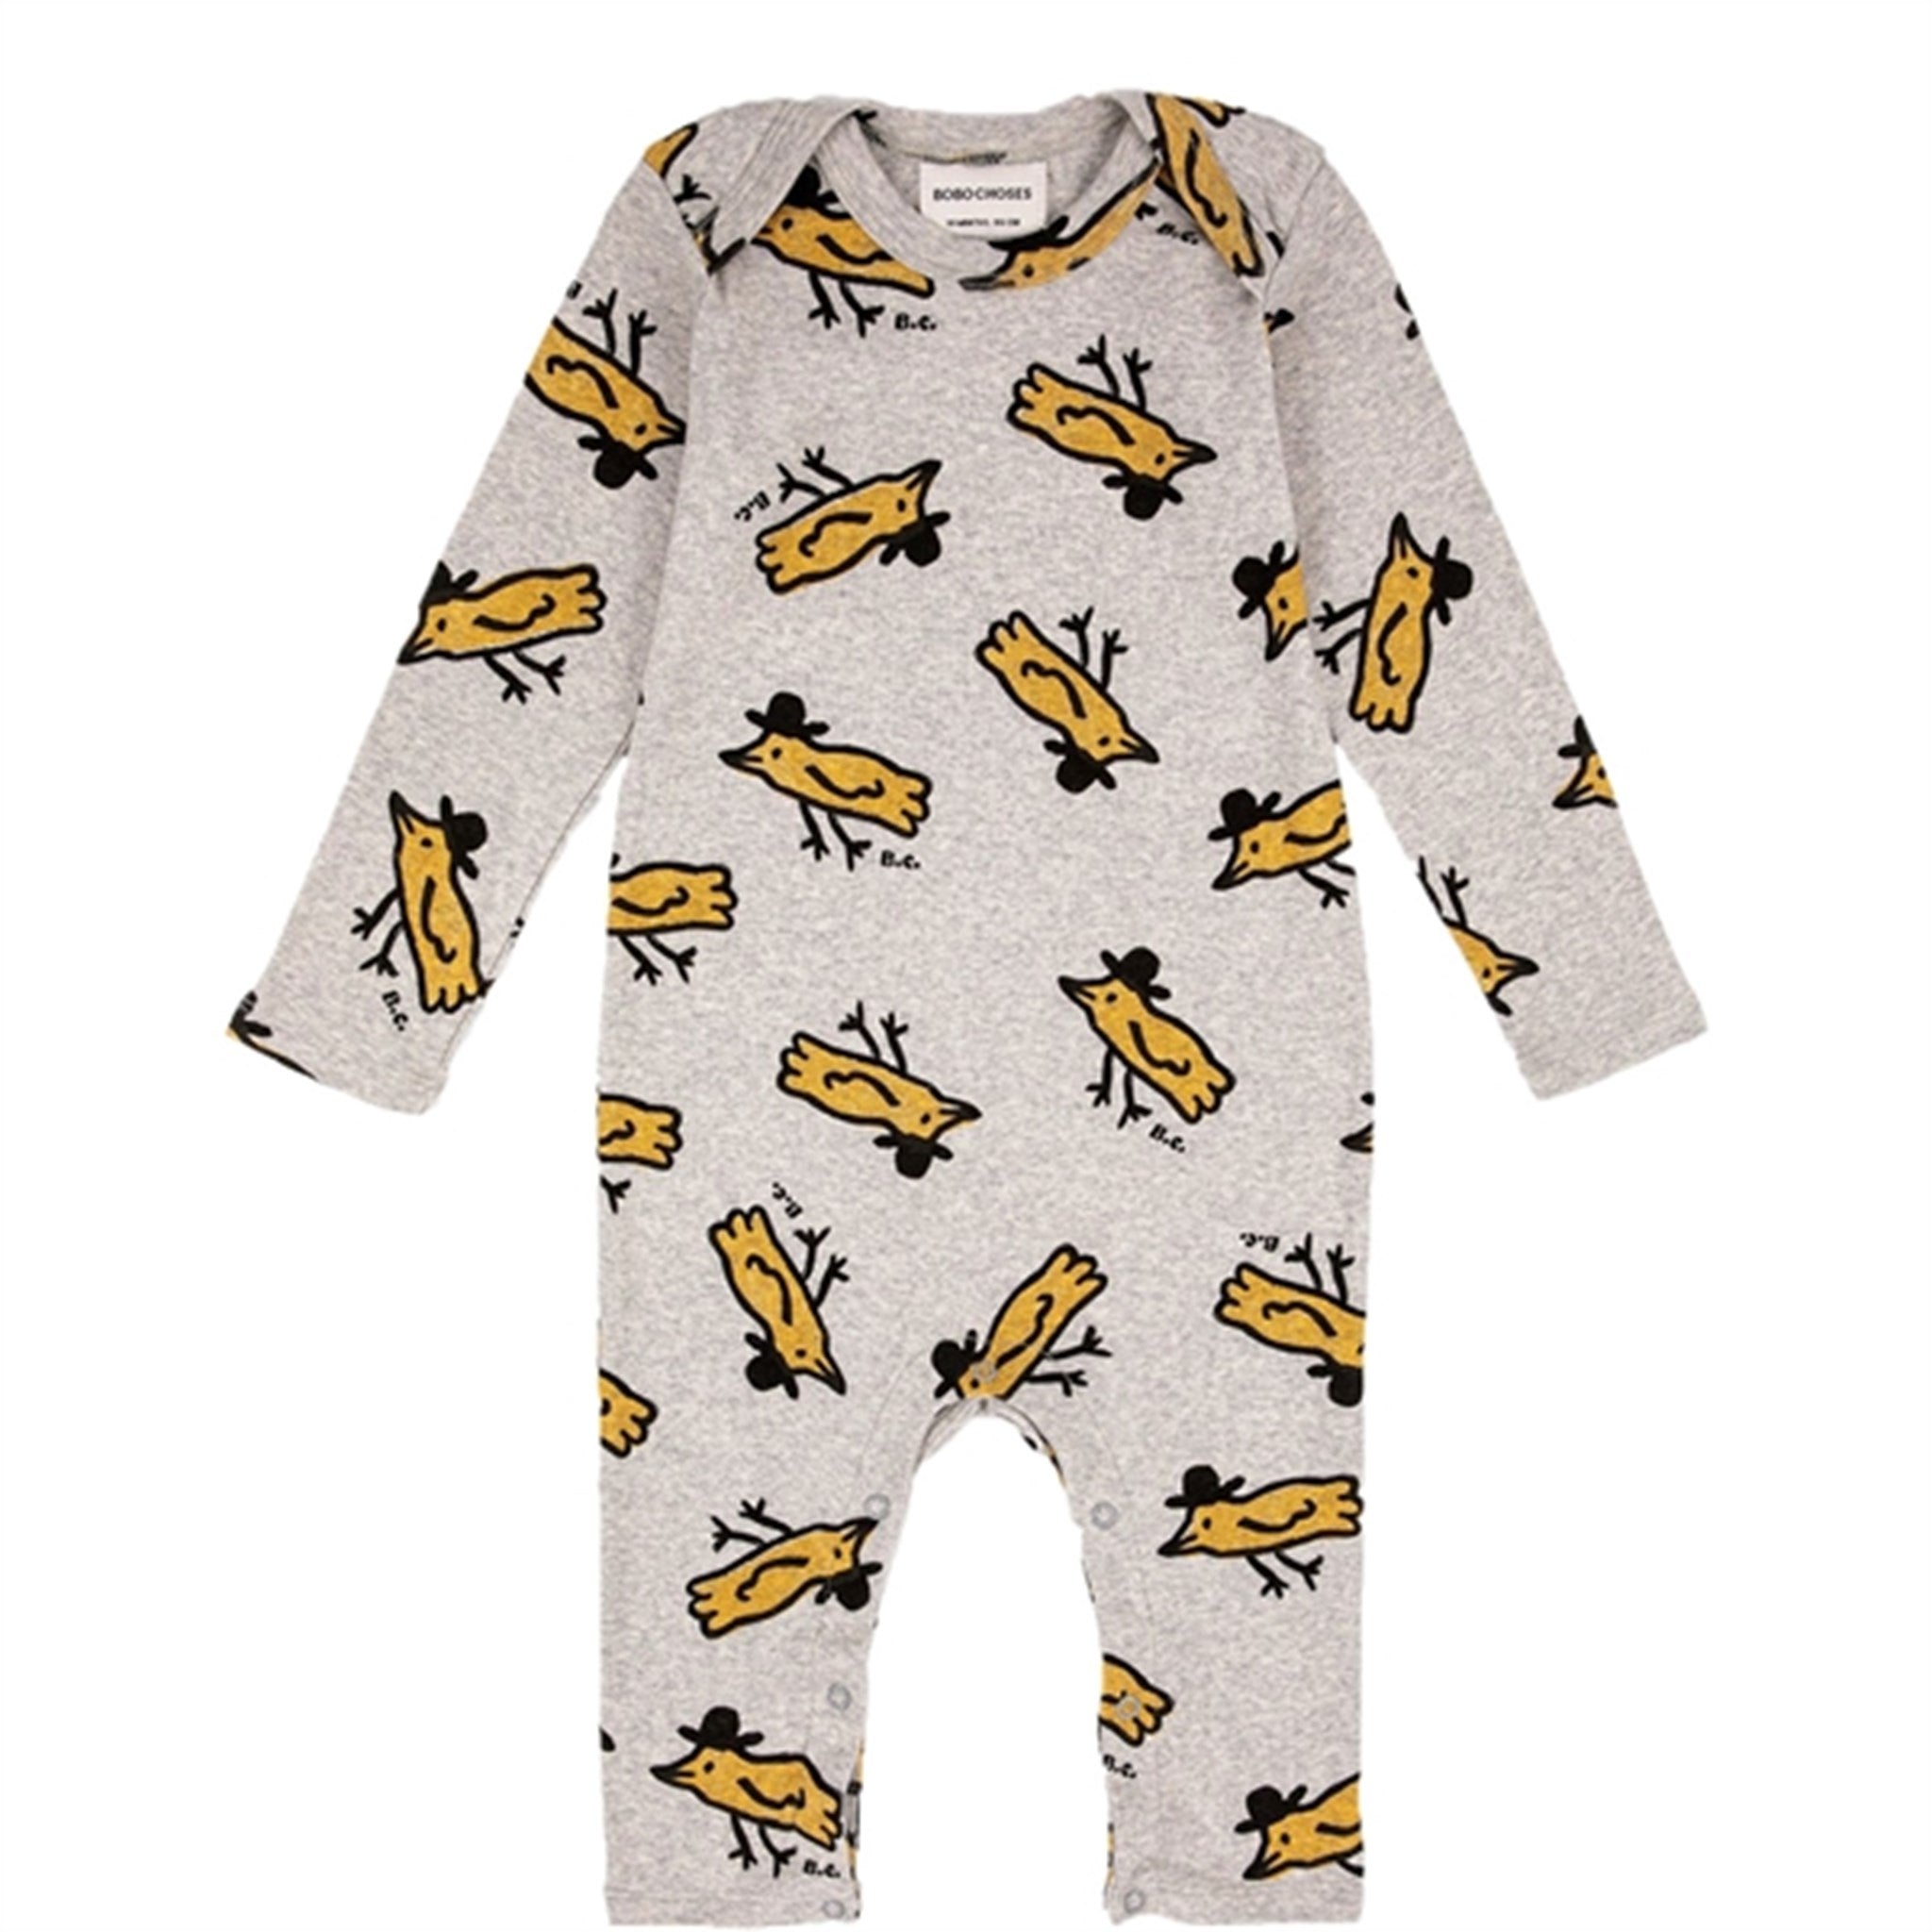 Bobo Choses Light Grey Mr Birdie All Over Overall